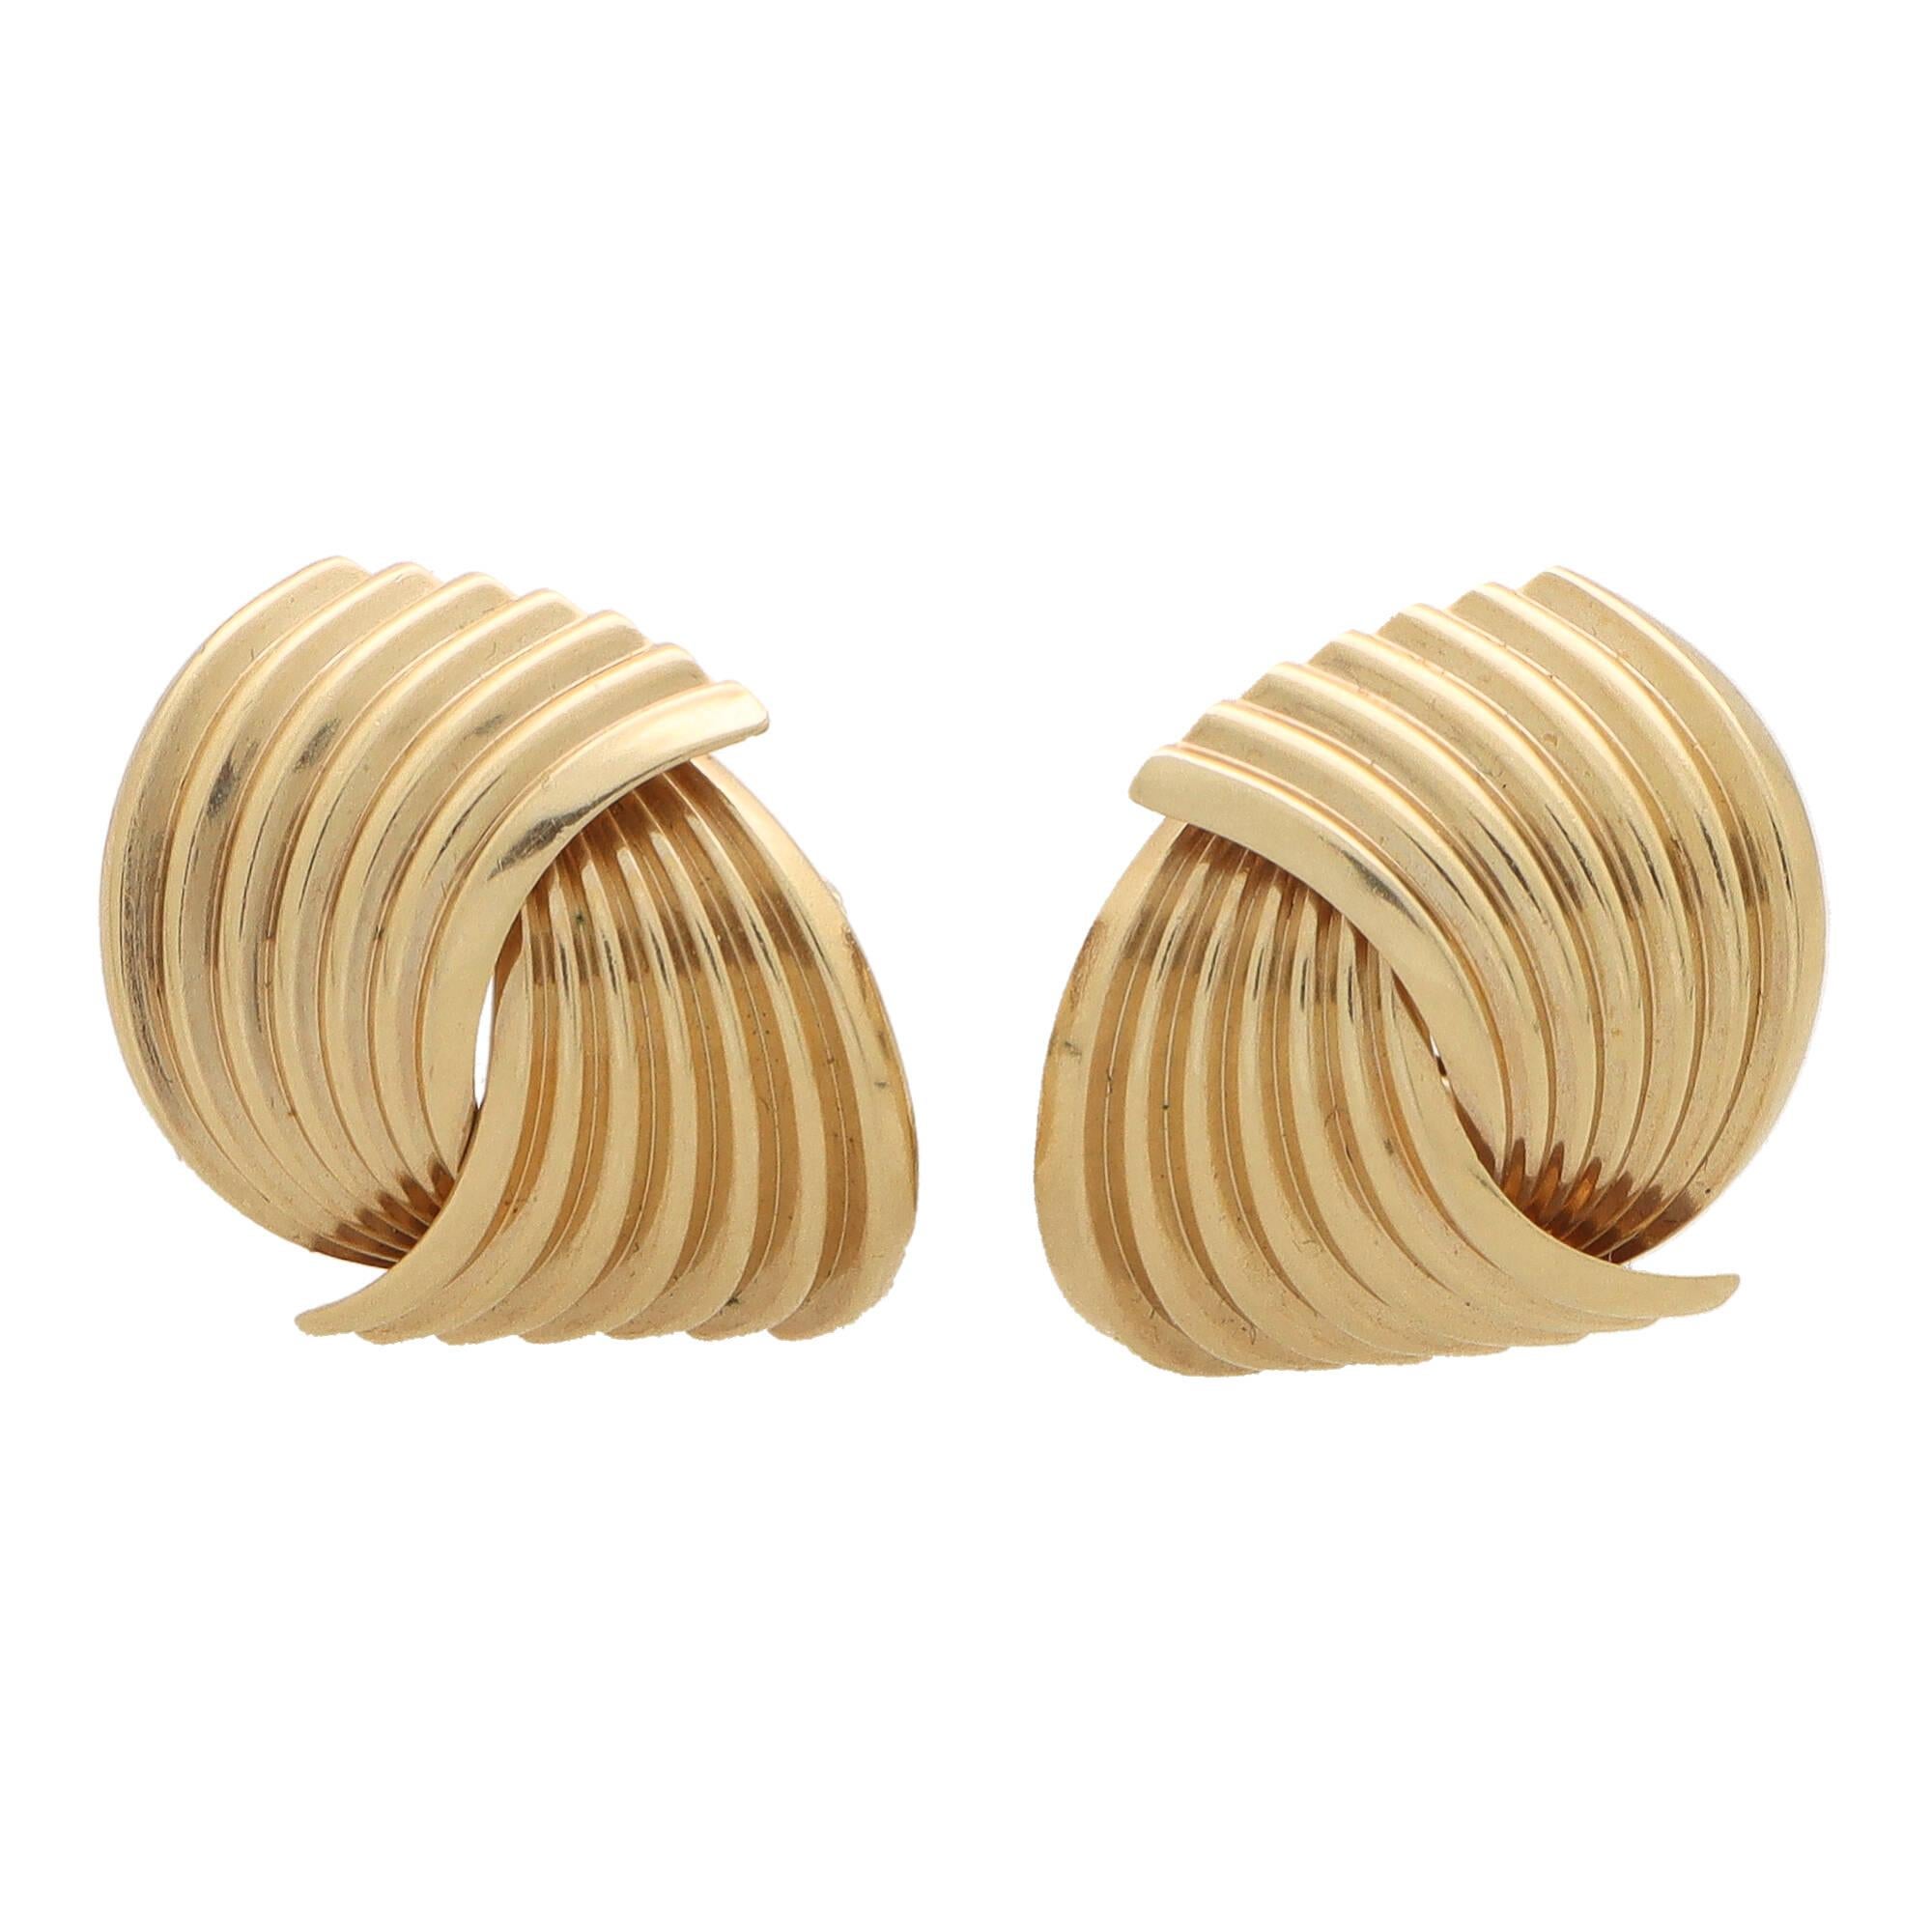  Vintage Tiffany & Co. Fluted Fan Earrings in 14k Rose Gold In Excellent Condition For Sale In London, GB